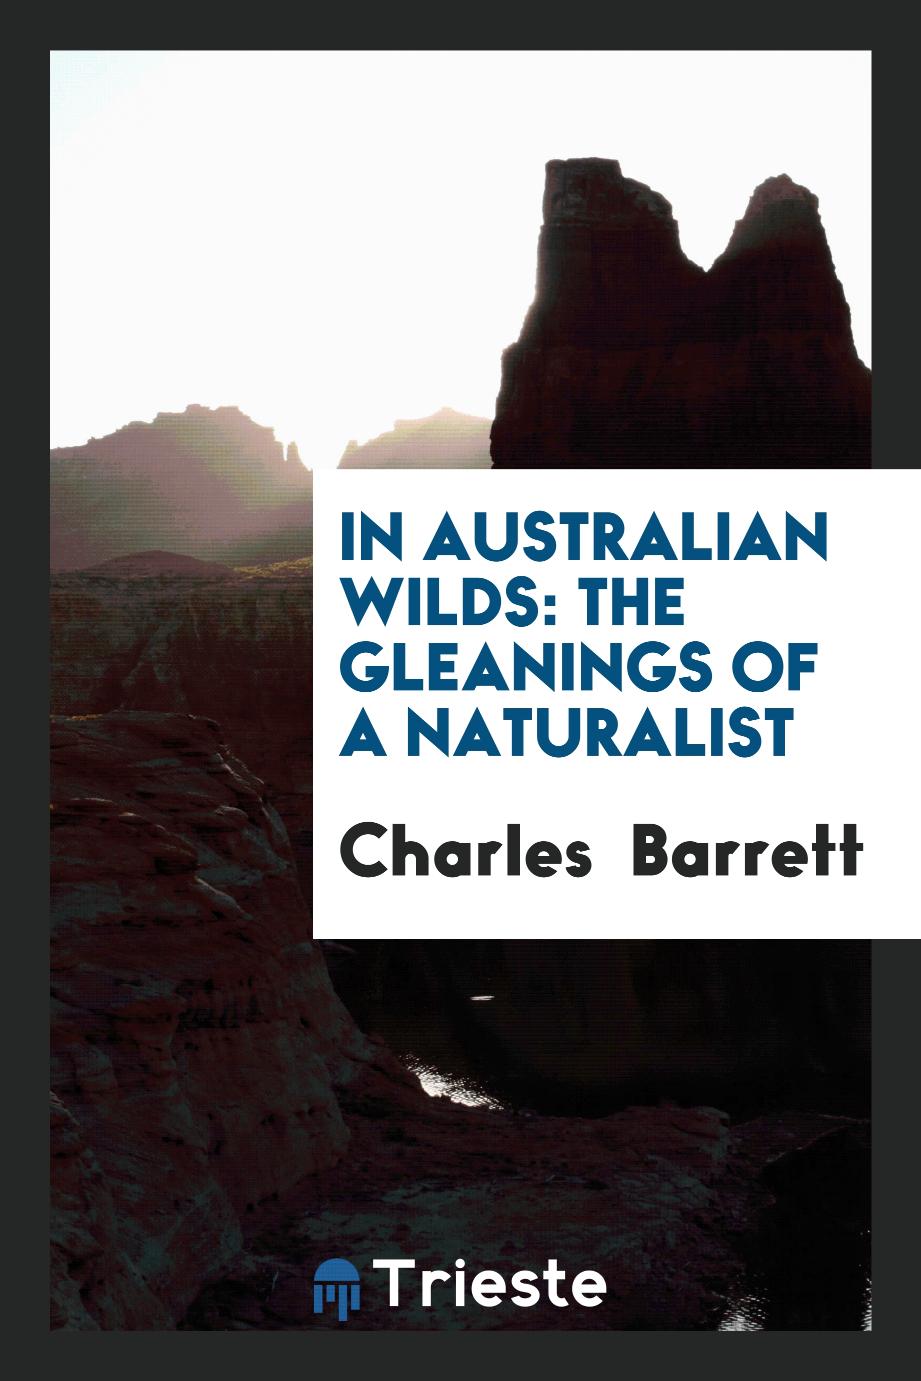 Charles  Barrett - In Australian wilds: the gleanings of a naturalist